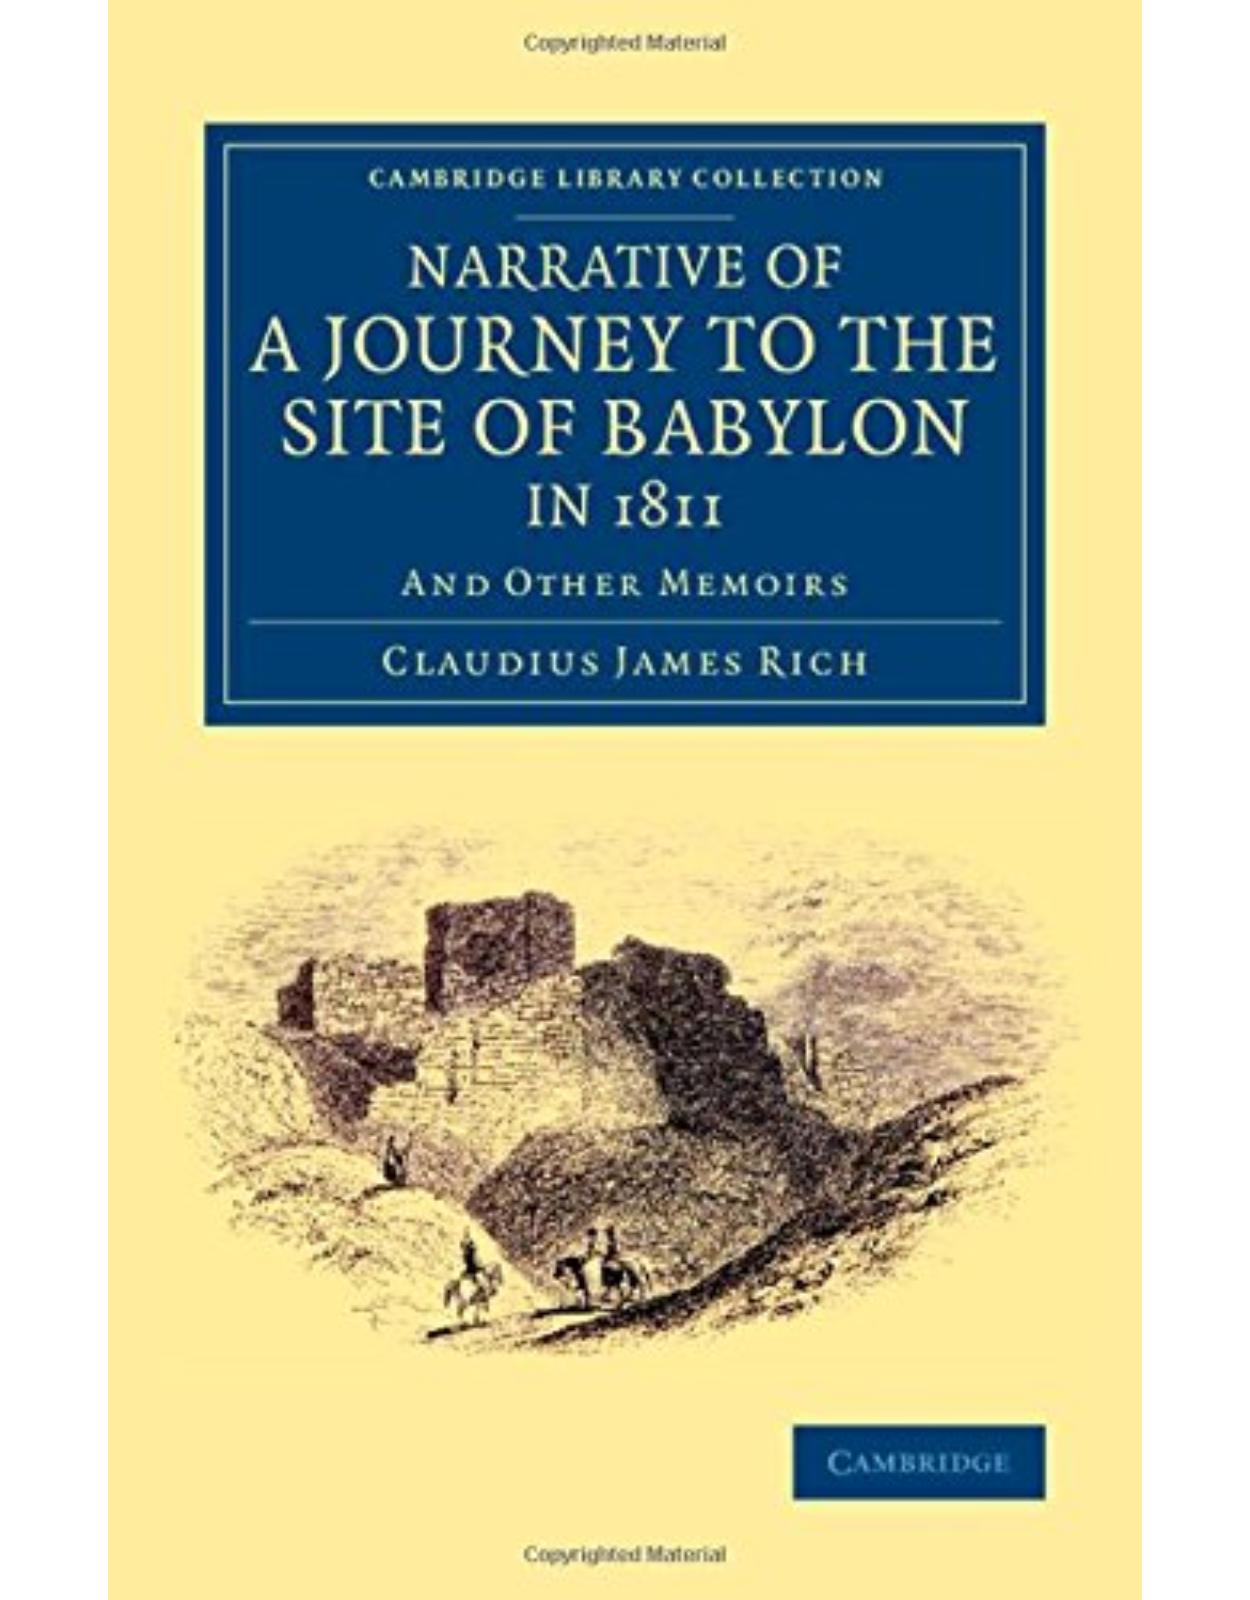 Narrative of a Journey to the Site of Babylon in 1811: And Other Memoirs (Cambridge Library Collection - Archaeology)